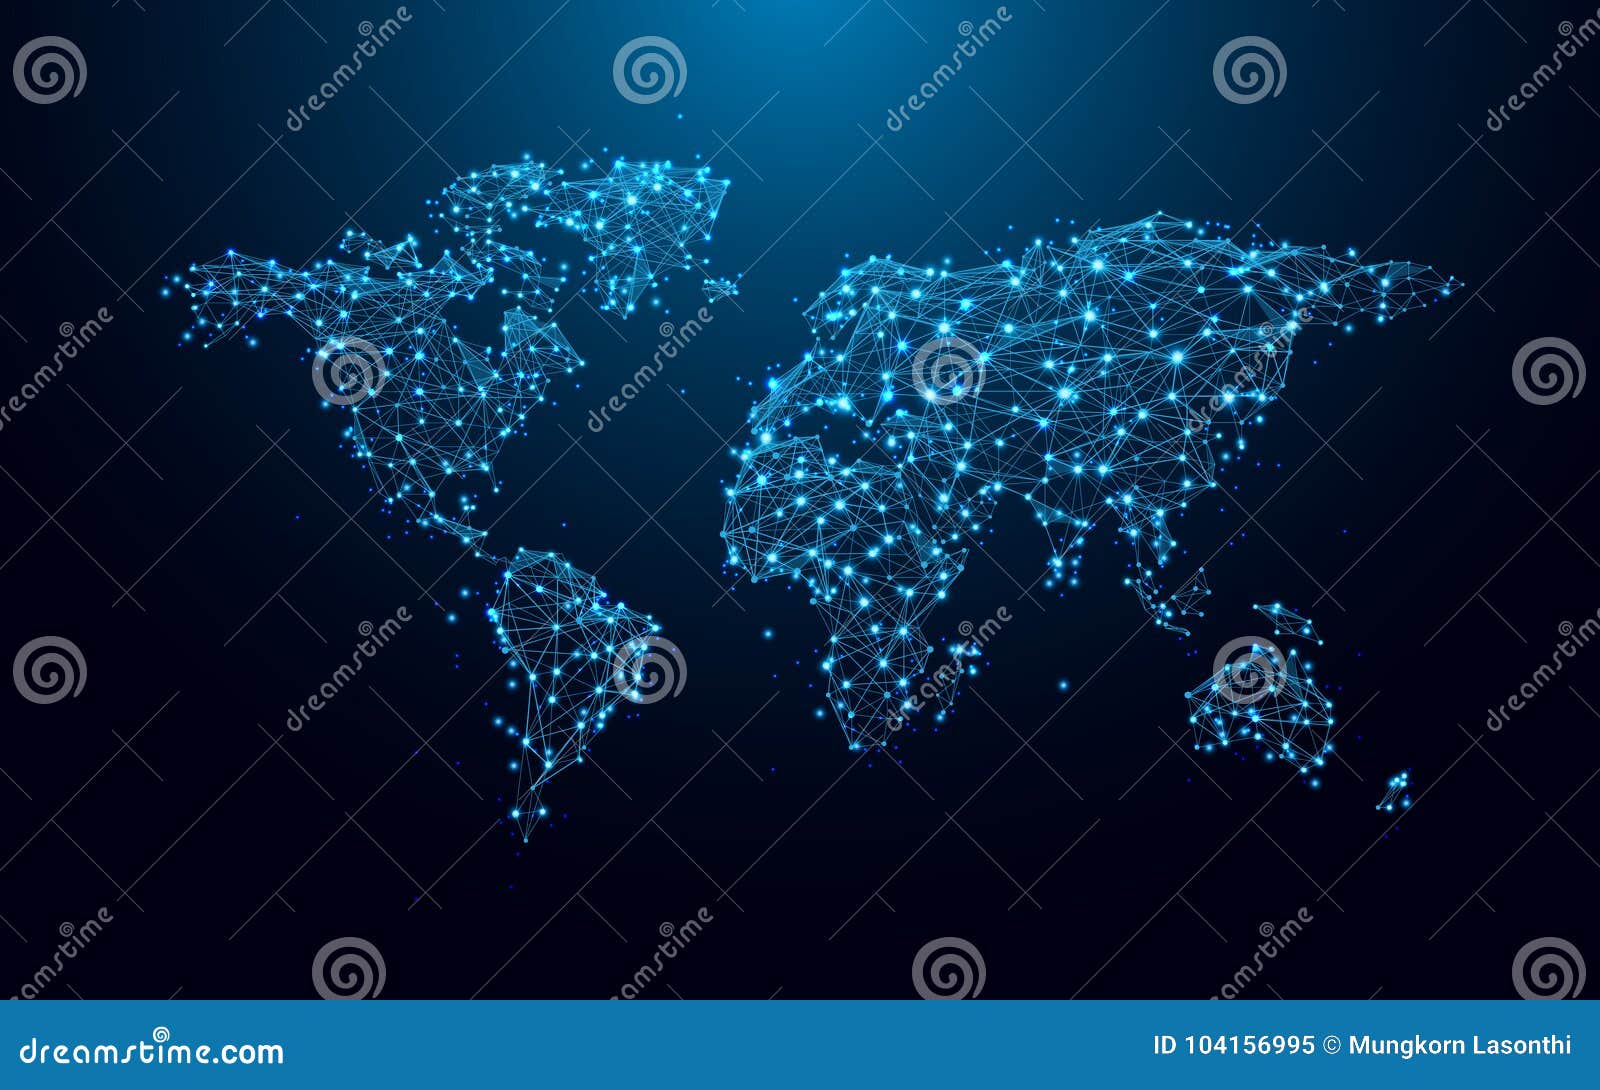 world map from lines and triangles, point connecting network on blue background